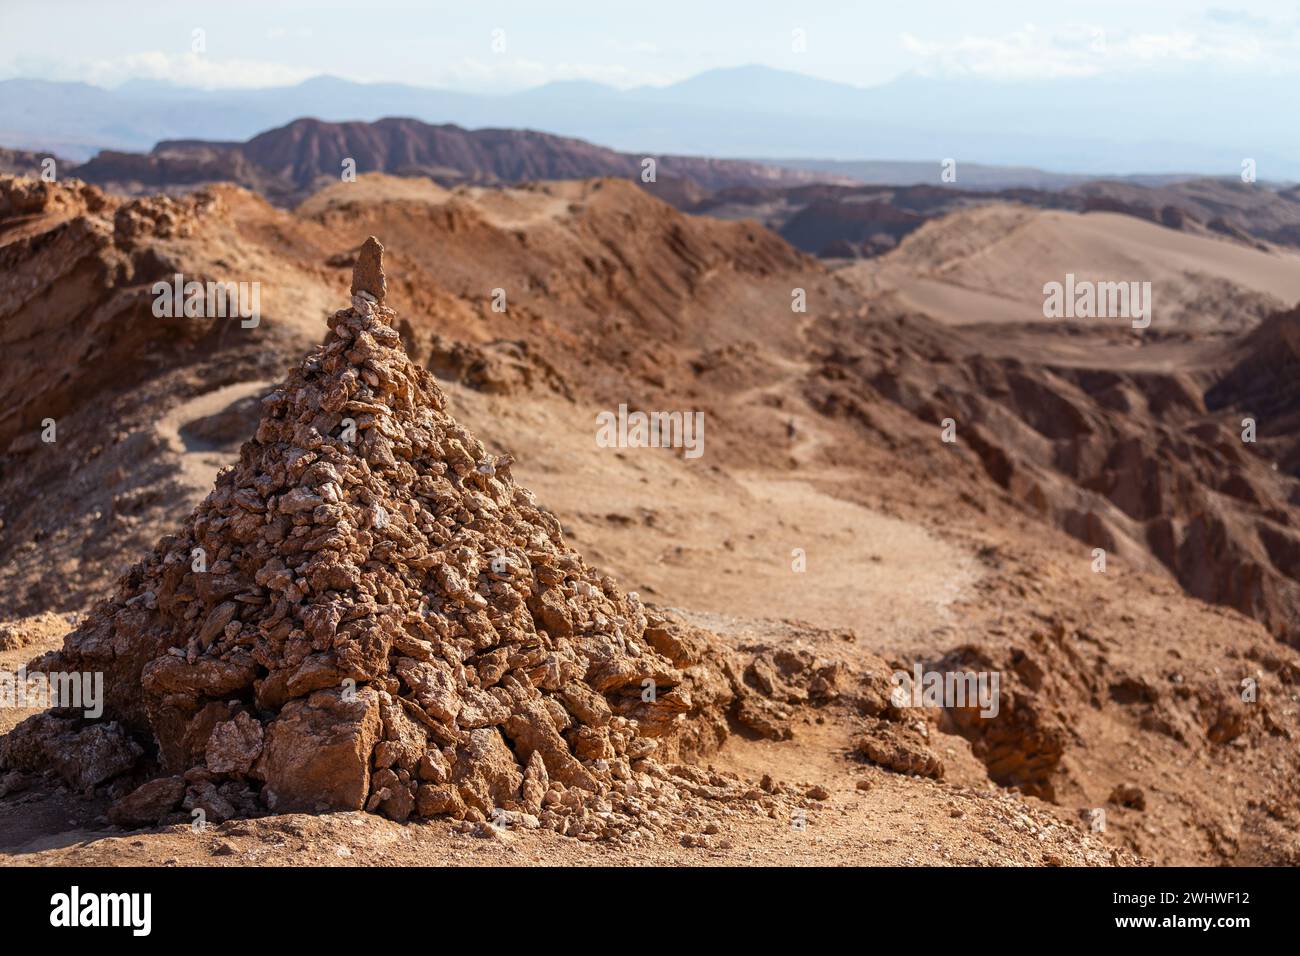 A red pile of stones in front of the hiking trail that runs through the Valley of Death, Valle de la Muerte, in the Atacama Desert. Stock Photo